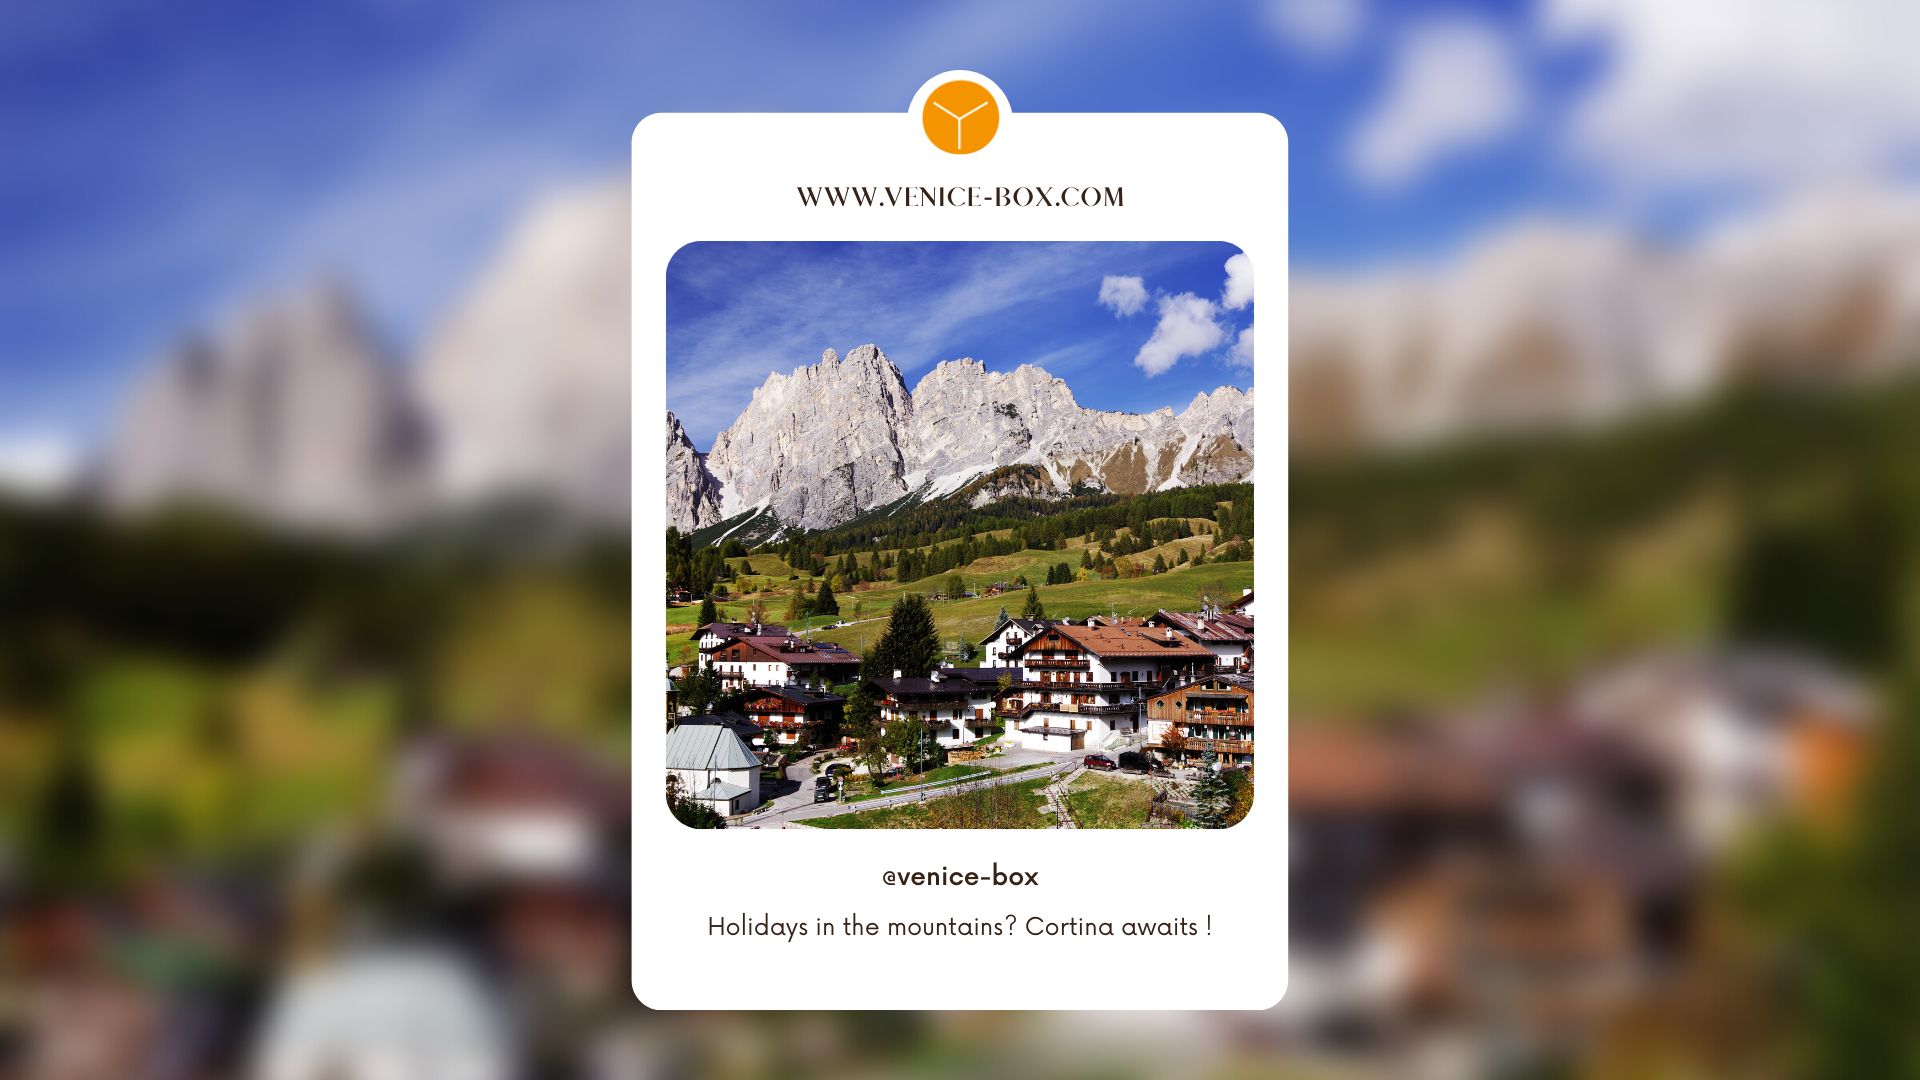 Holidays in the mountains? Cortina awaits!